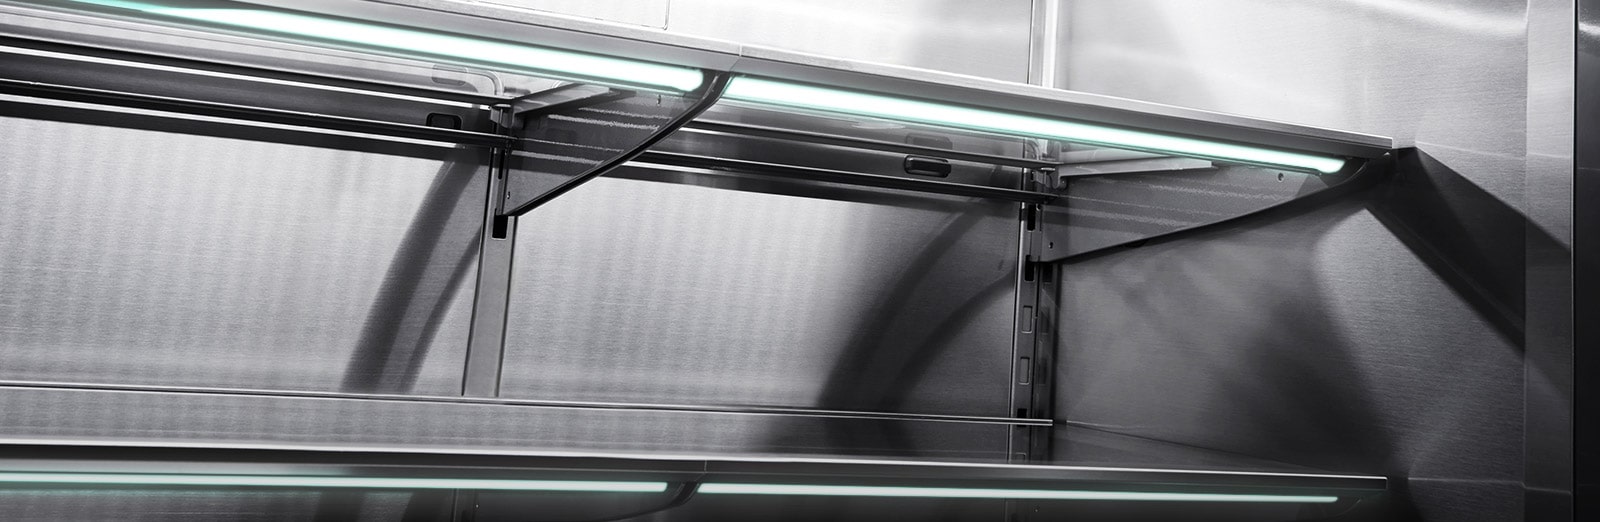 Close horizontal shot of the stainless inner walls of LG SIGNATURE Refrigerator.